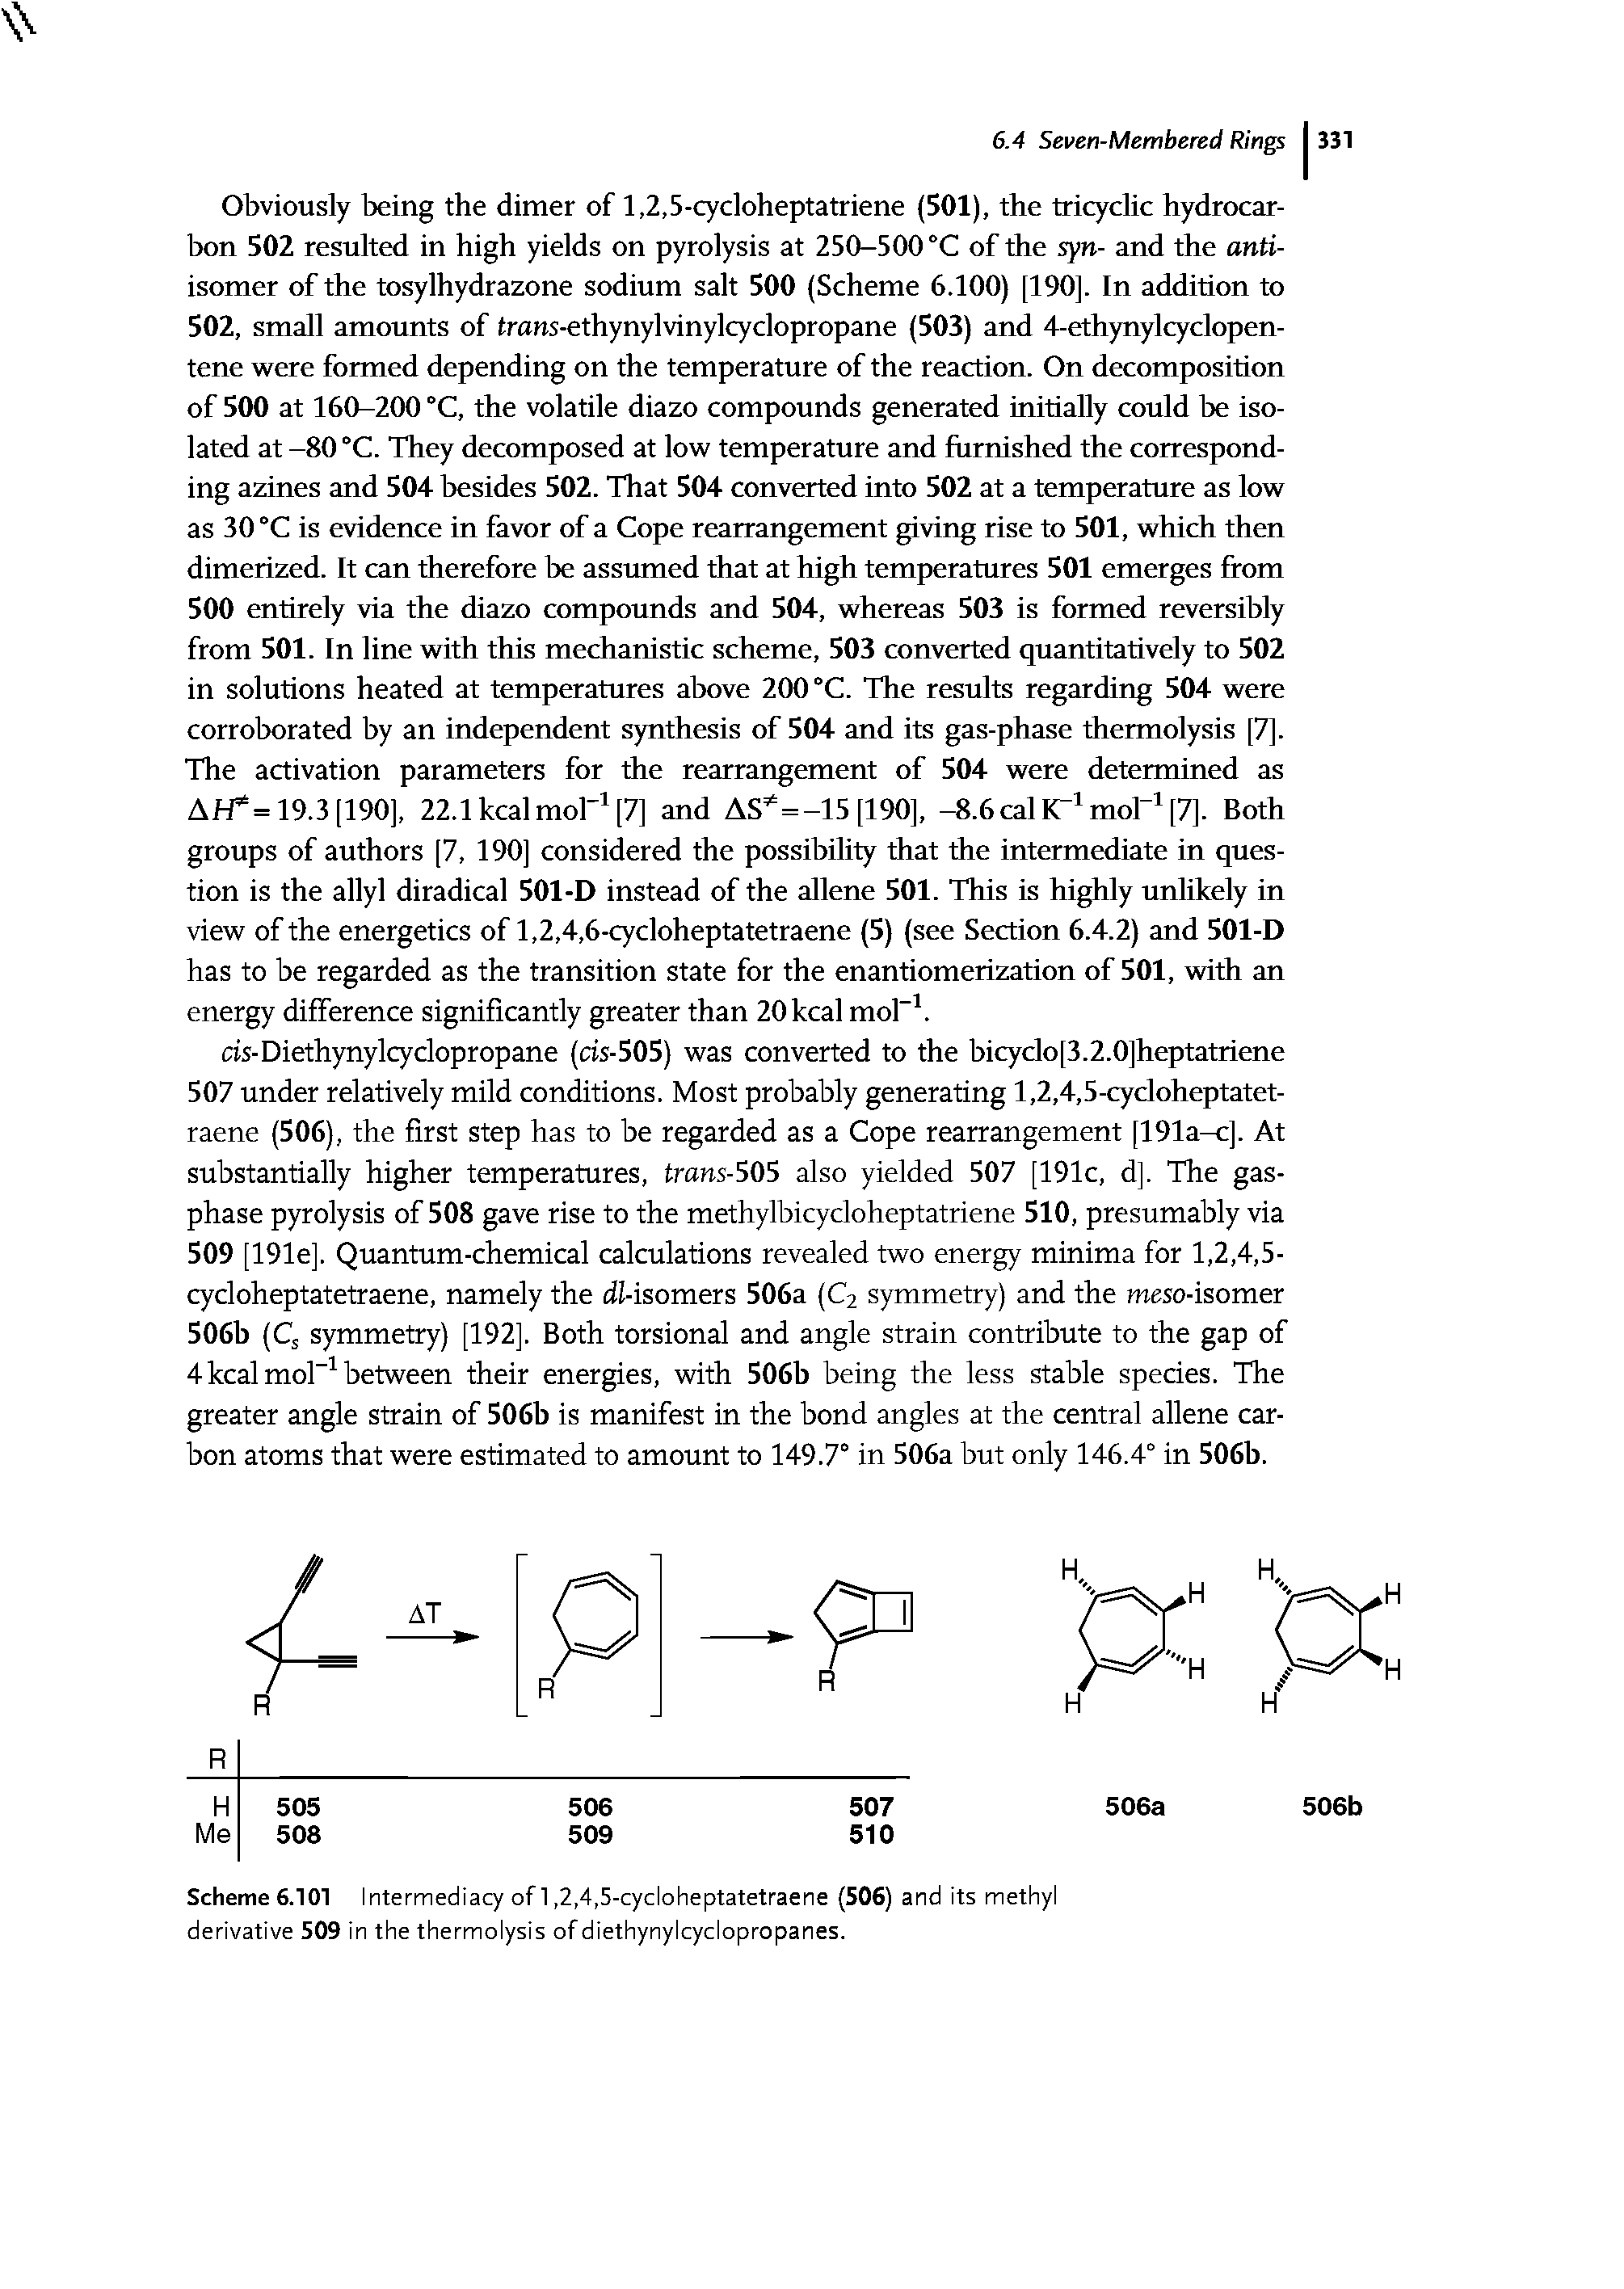 Scheme 6.101 Intermediacy of 1,2,4,5-cycloheptatetraene (506) and its methyl derivative 509 in the thermolysis of diethynylcyclopropanes.